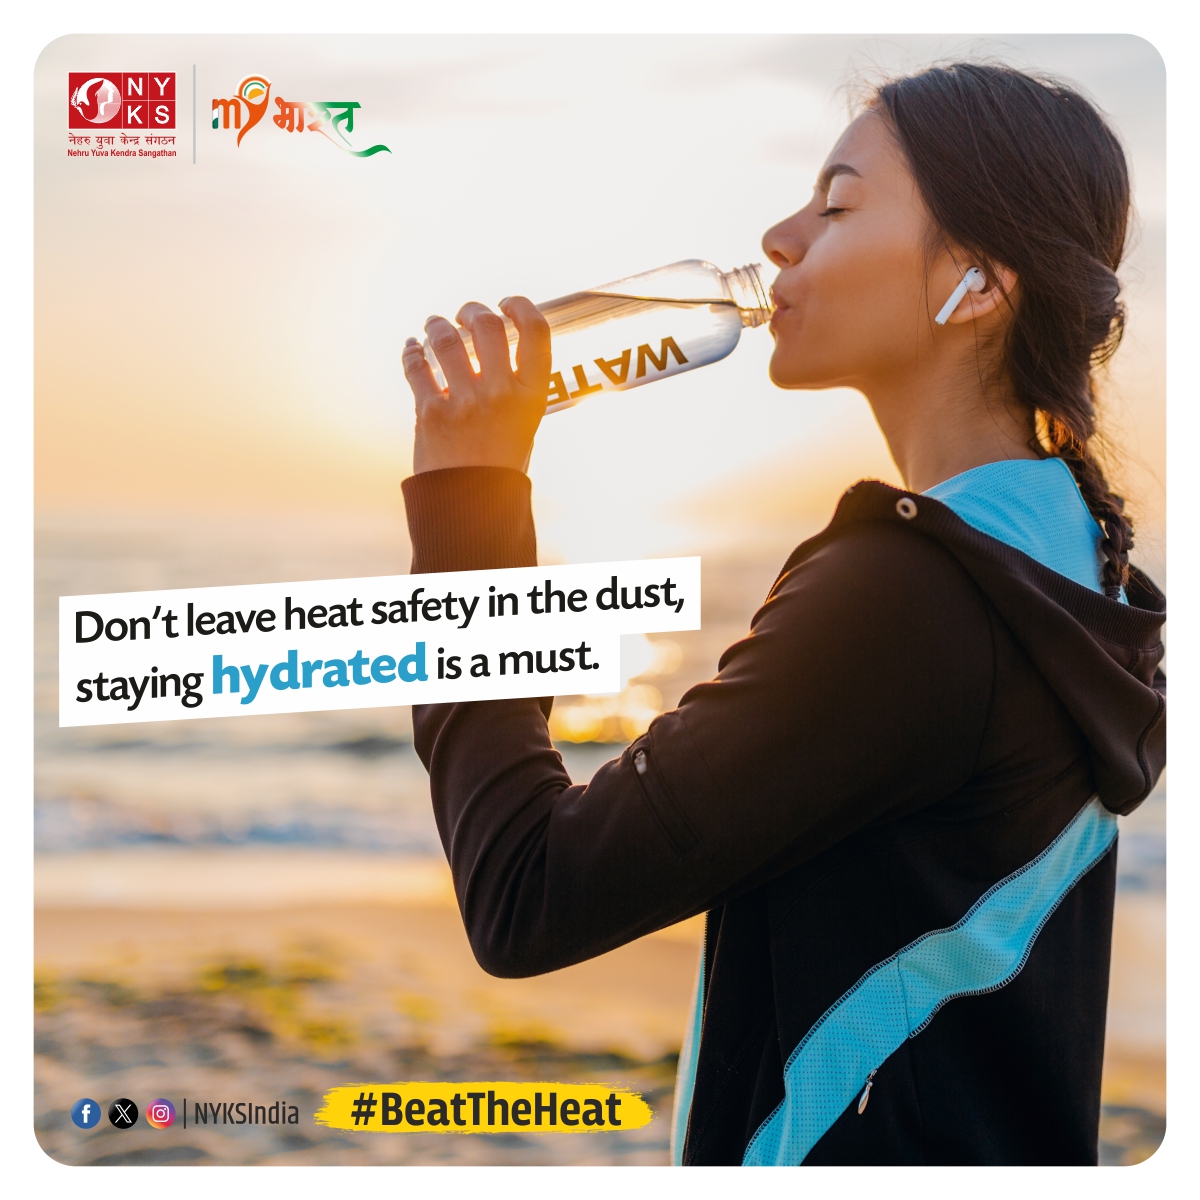 Don't let heat catch you off guard! Keep cool and stay hydrated to beat the summer heat. ☀️💧 #BeatTheHeat #StayHydrated #NYKS @Anurag_Office @ianuragthakur @YASMinistry @NisithPramanik @NITKM2021 @MoHFW_INDIA @mybharatgov @mygovindia @airnewsalerts